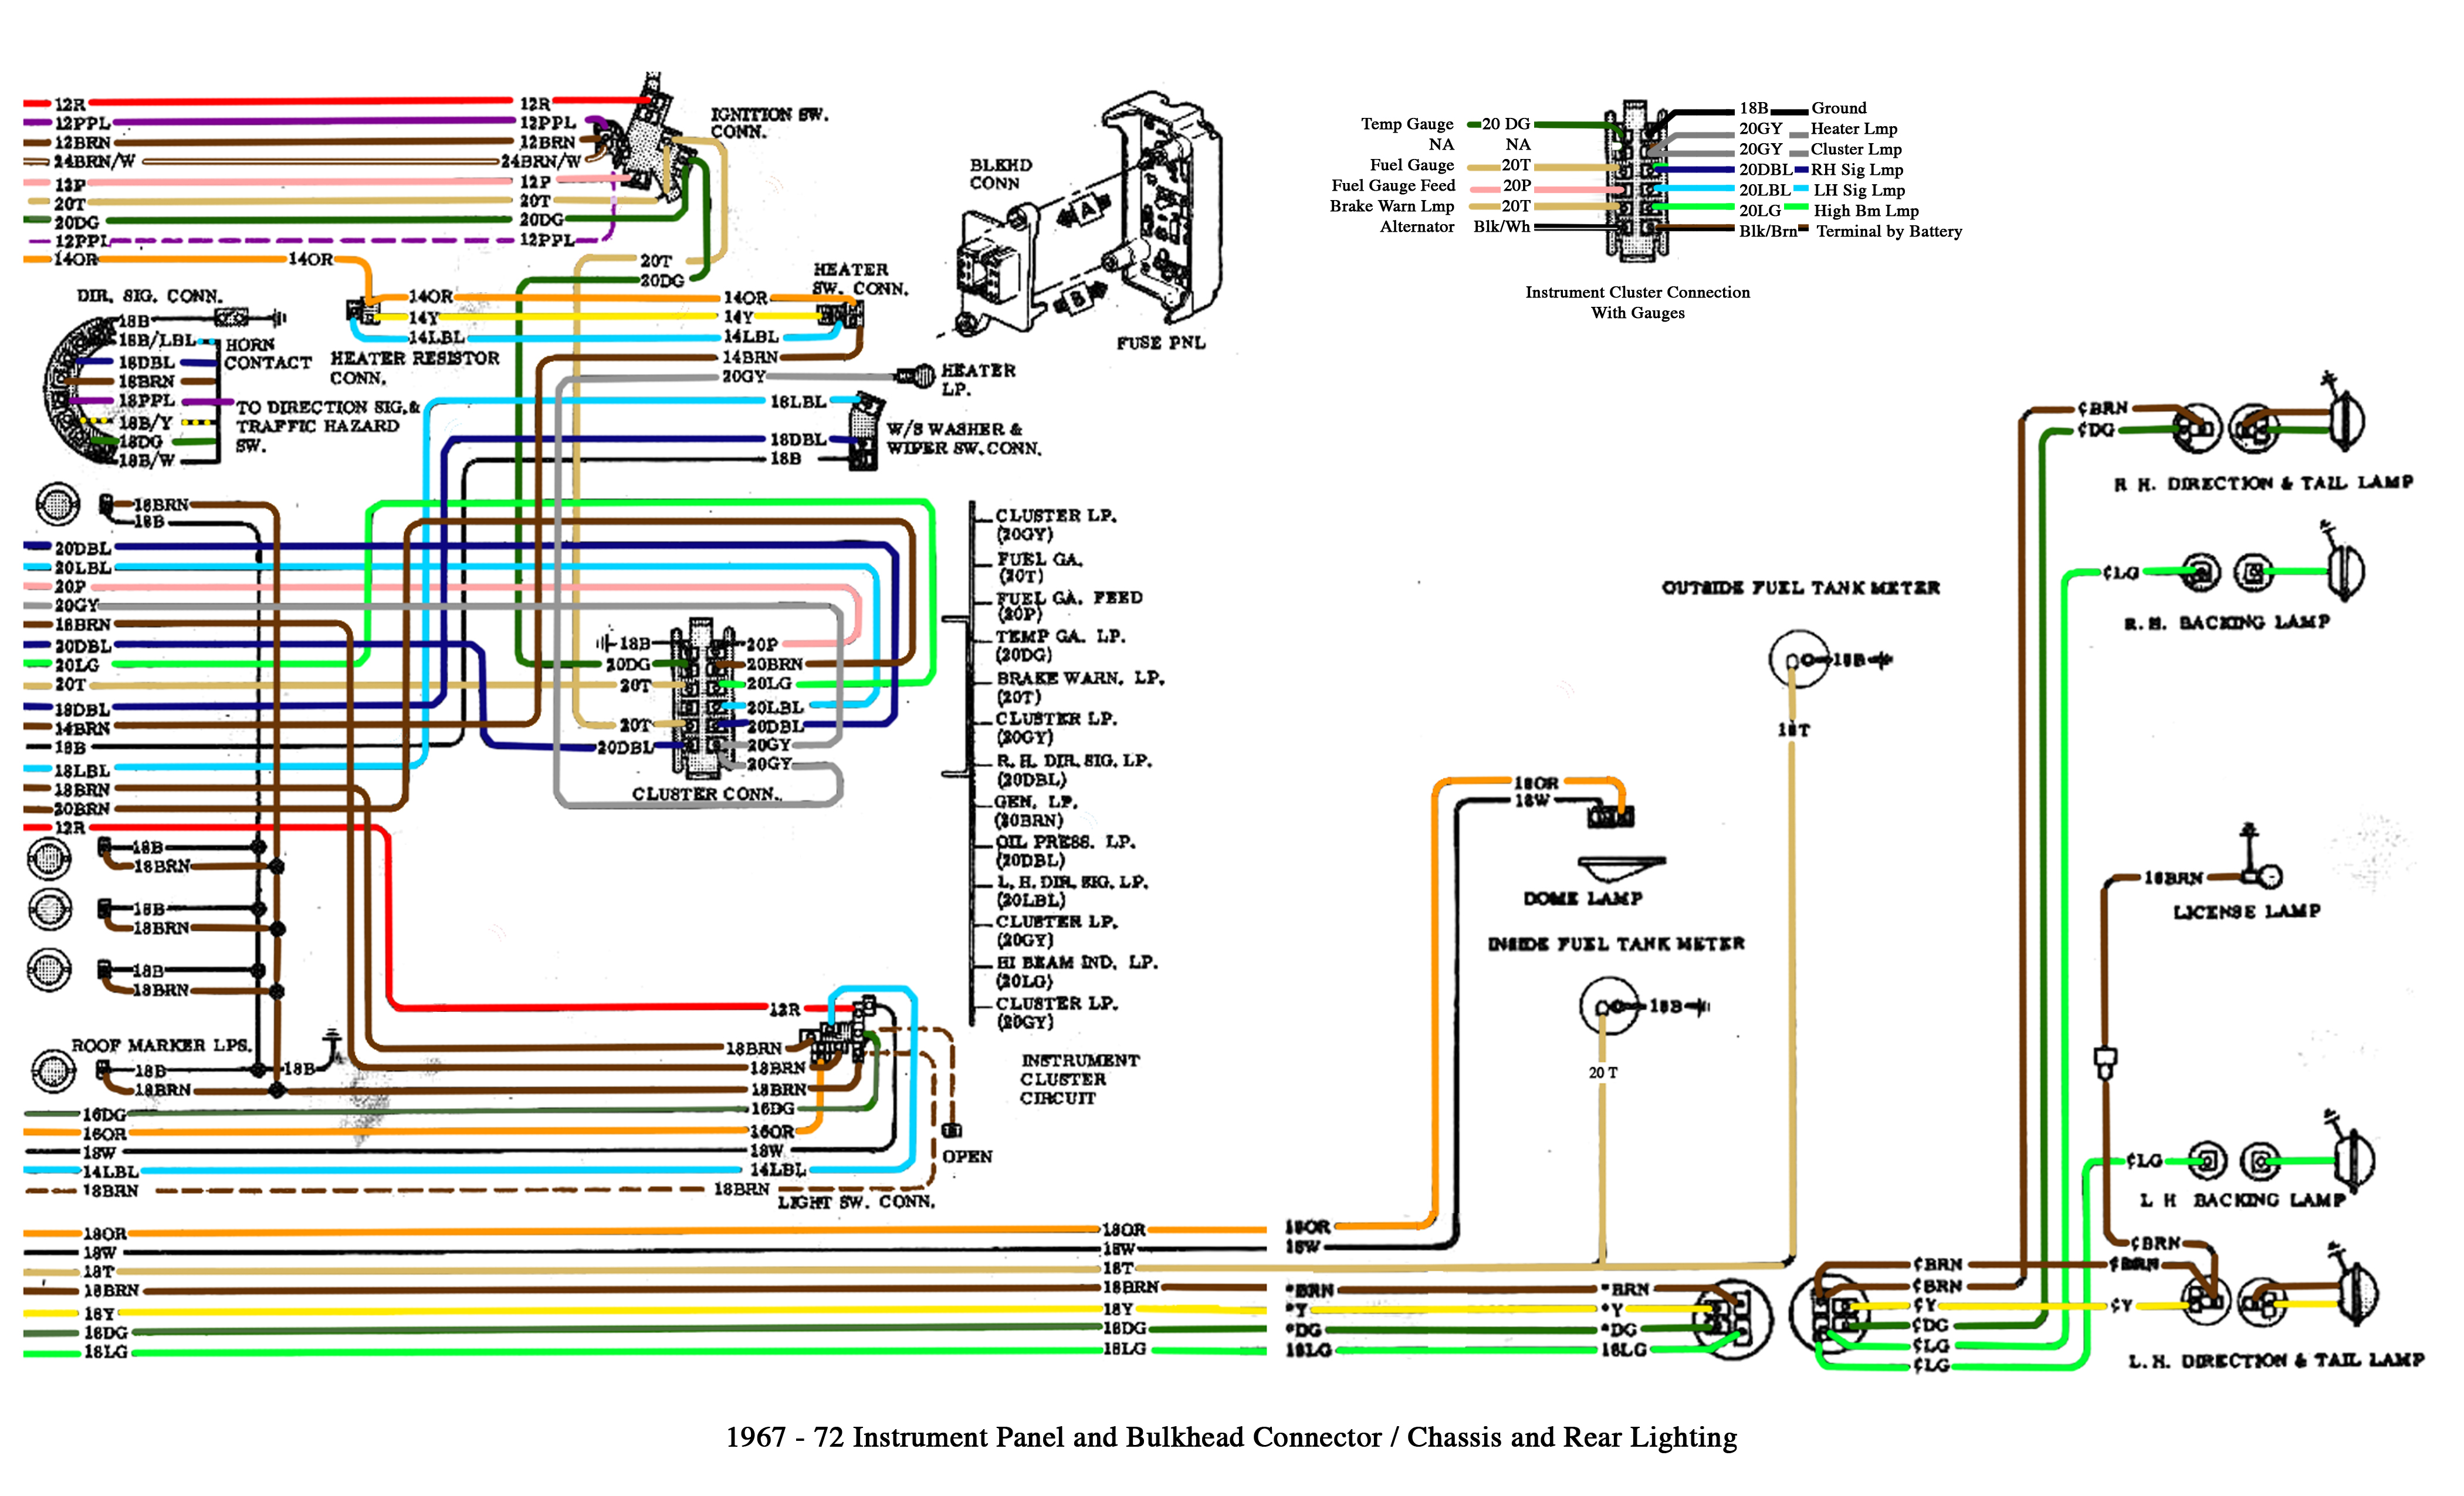 Color Wiring Diagram FINISHED - The 1947 - Present Chevrolet & GMC Truck  Message Board Network  1970 C10 Spark Plug Wiring Diagram    67-72 Chevy Trucks